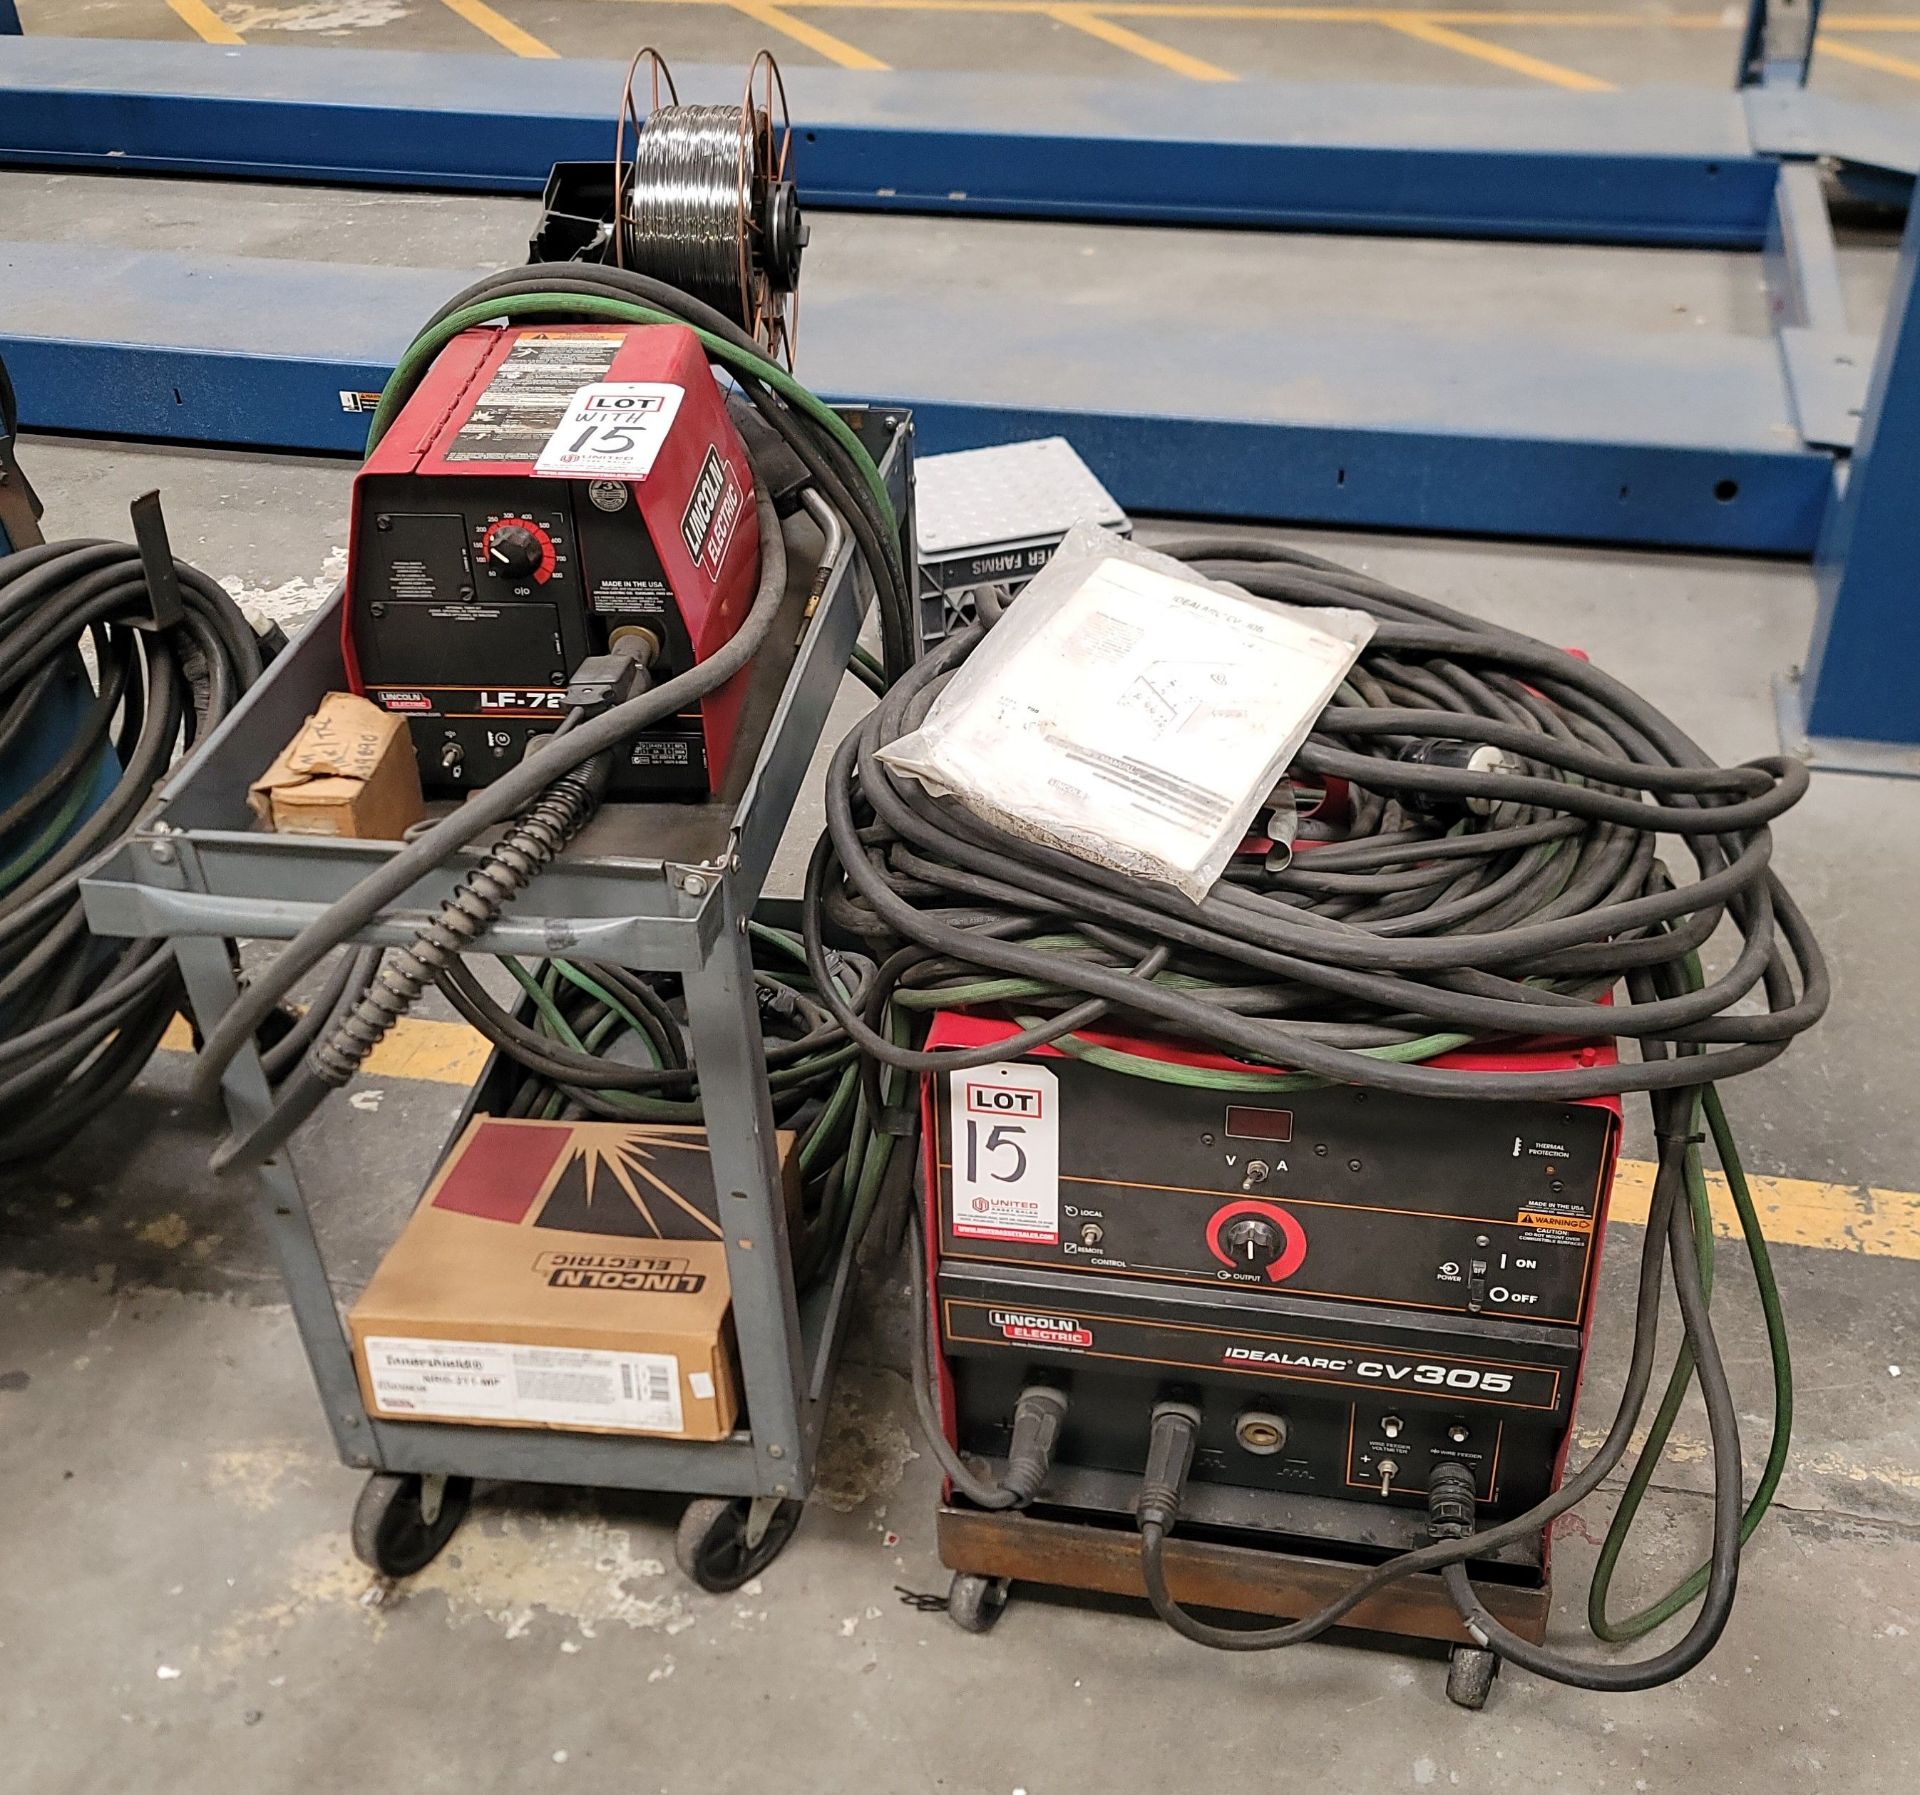 LINCOLN ELECTRIC IDEALARC CV305 WELDING POWER SOURCE, W/ LINCOLN ELECTRIC LF-72 WIRE FEEDER, K2400-